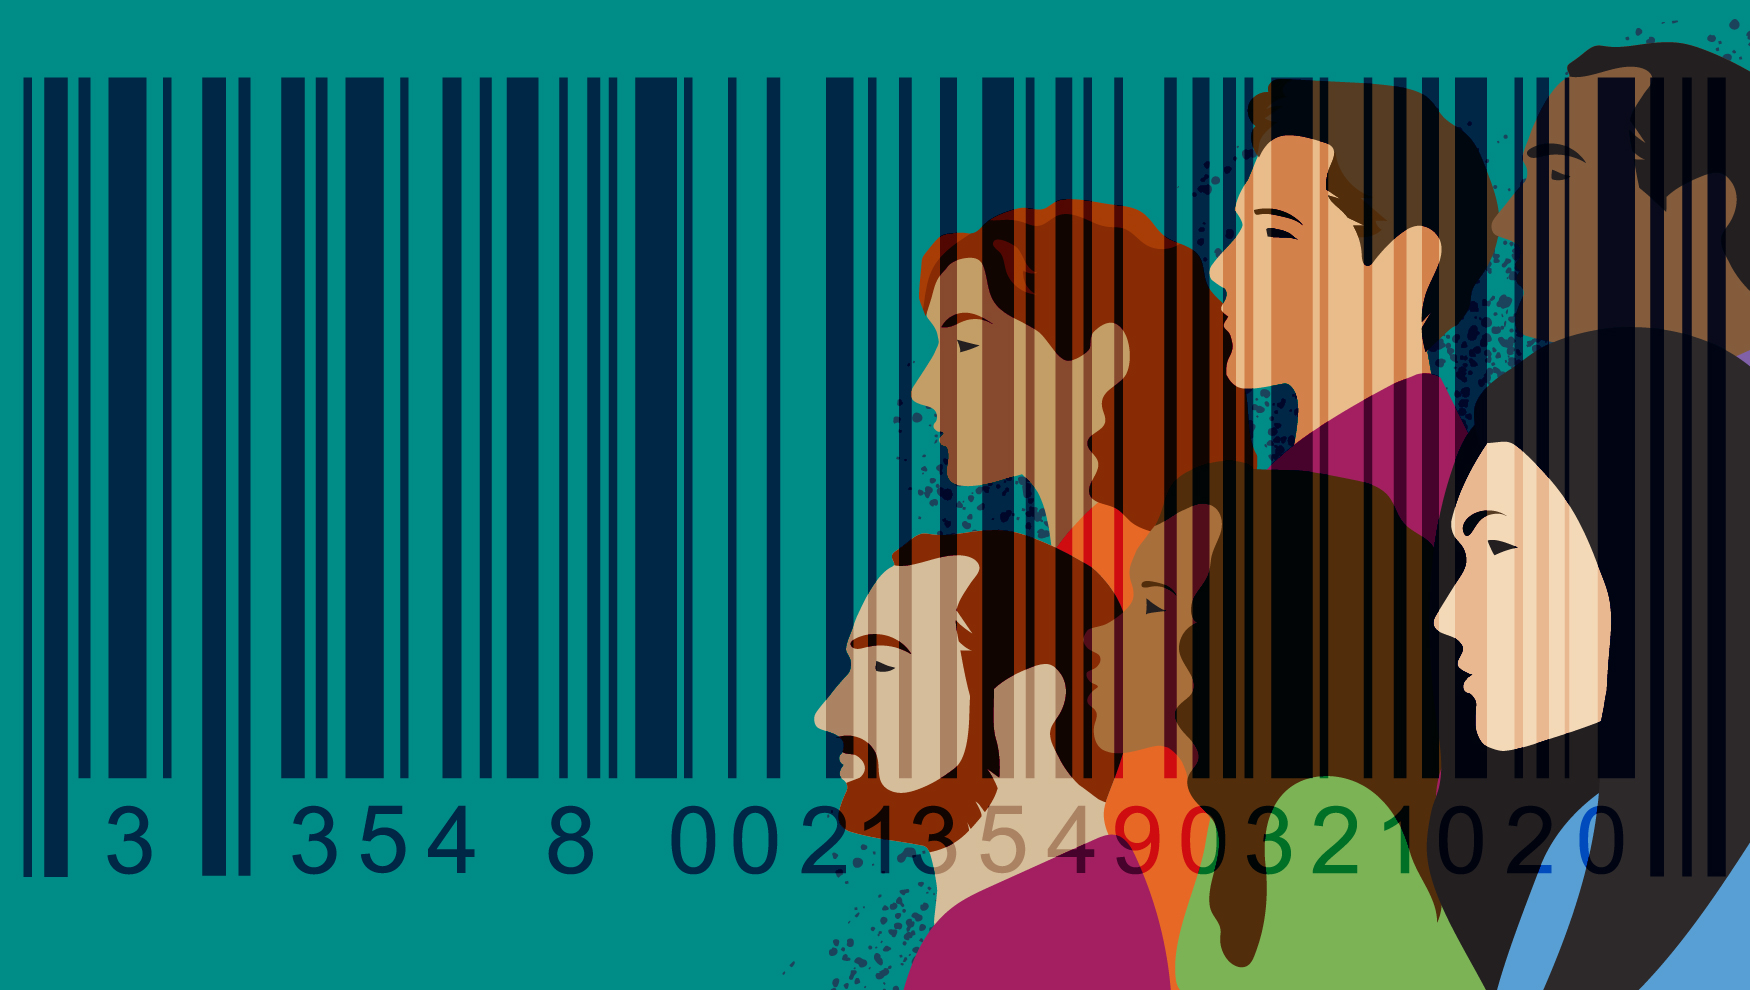 Illustration of people trapped in human trafficking with bar code as prison bars - raising awareness of money laundering's role in human trafficking